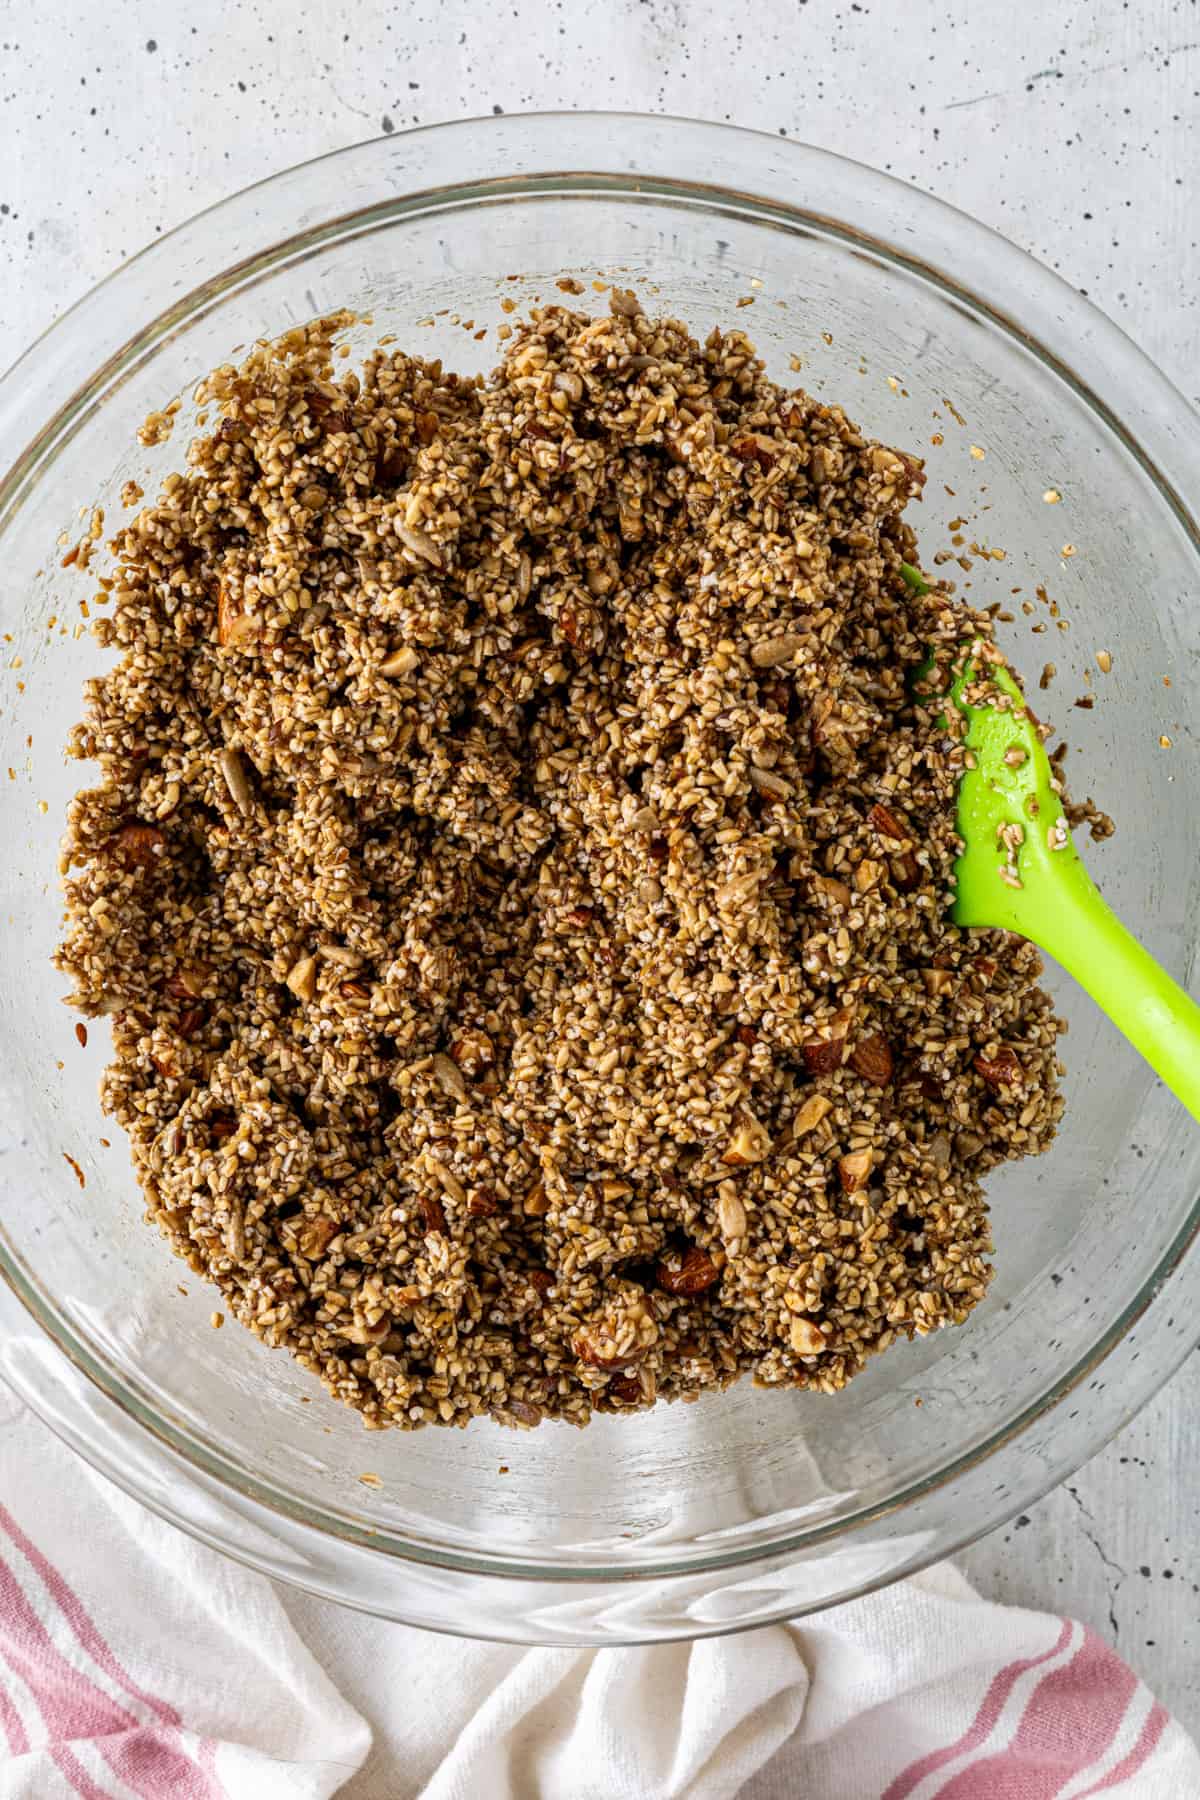 A bowl of steel cut oat granola mixture with a rubber spatula.